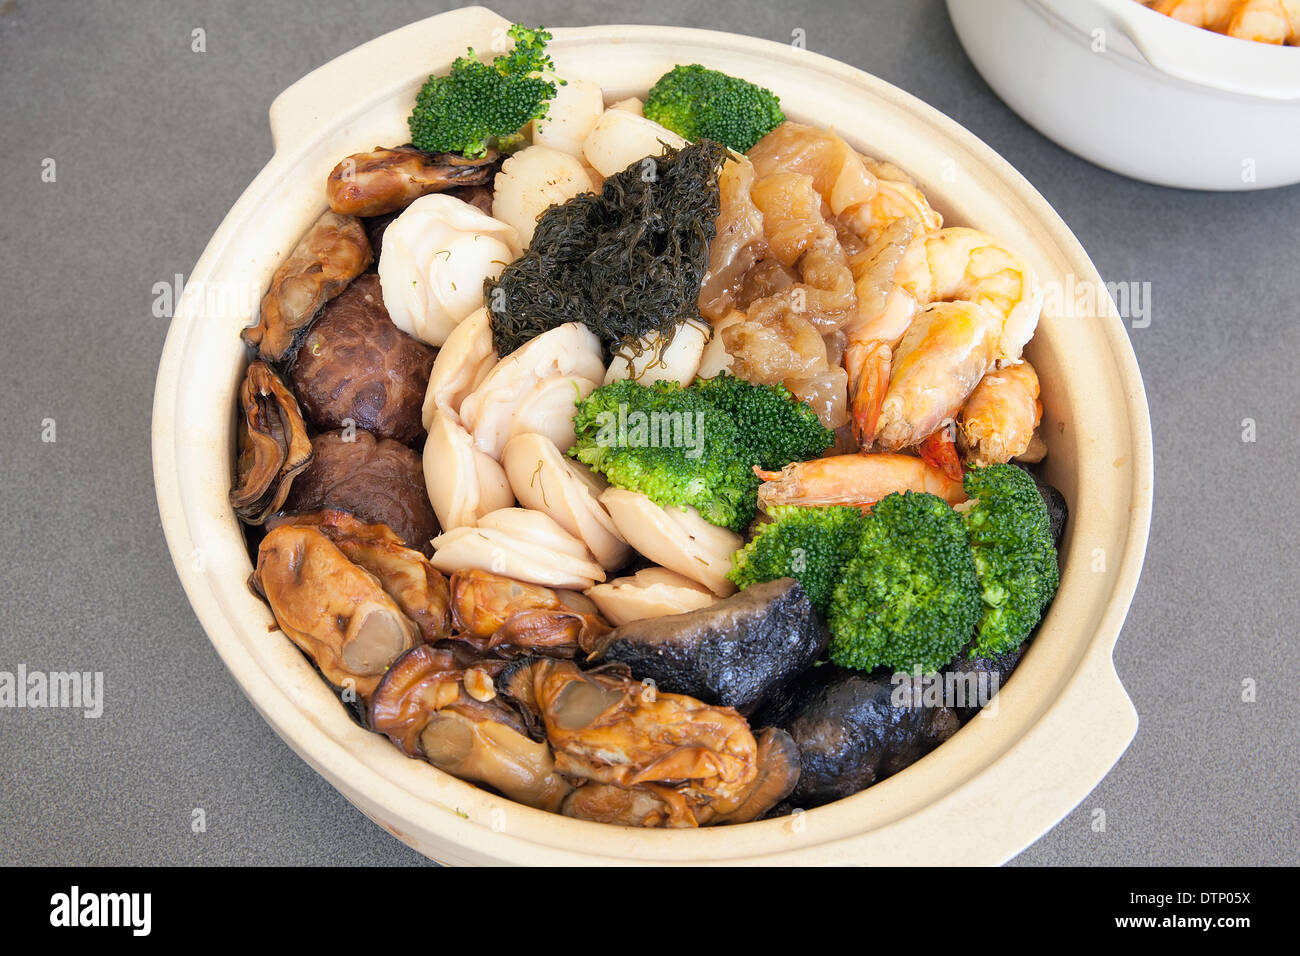 Poon Choi Hong Kong Cantonese Cuisine Big Feast Bowl with Seafood and Vegetables for Chinese New Year Dinner Stock Photo